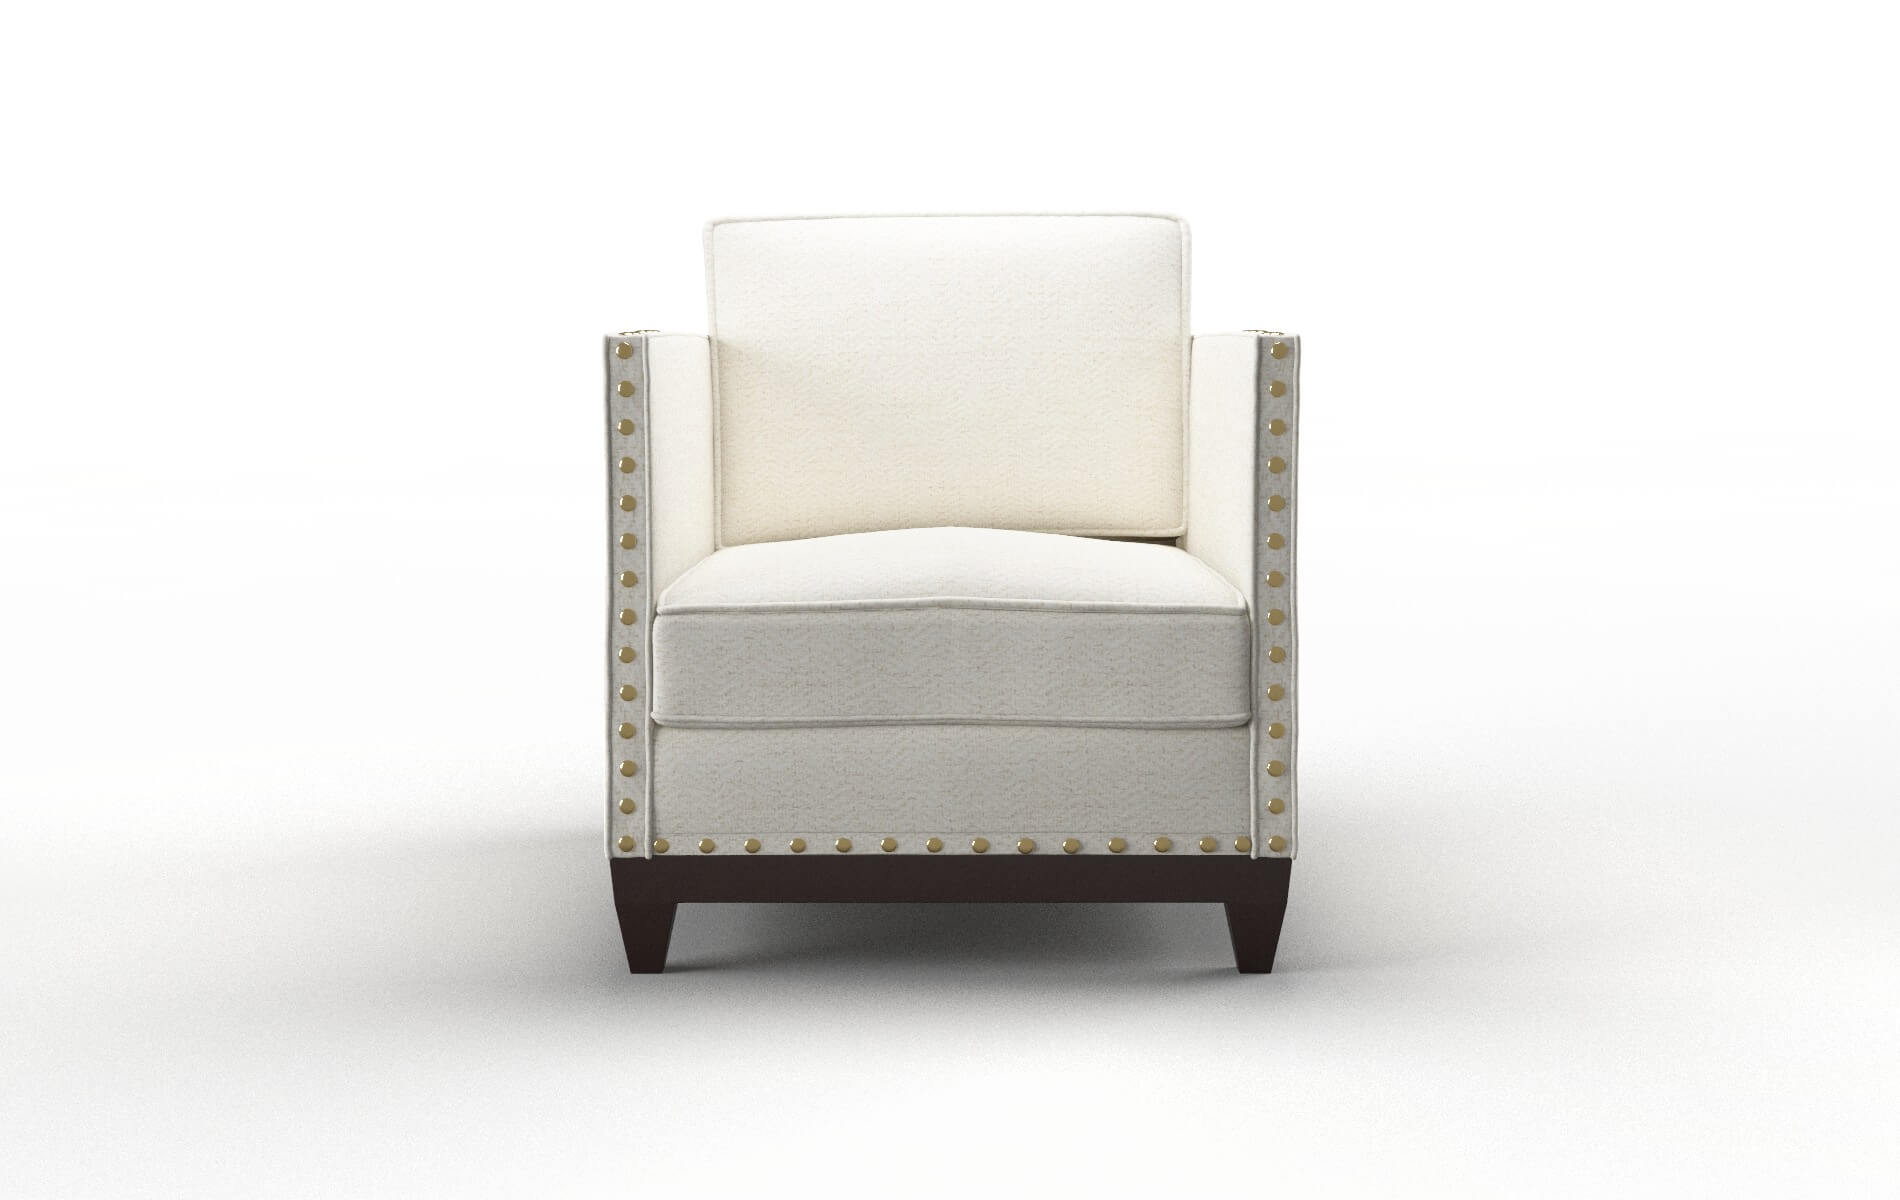 Florence Catalina Ivory chair espresso legs